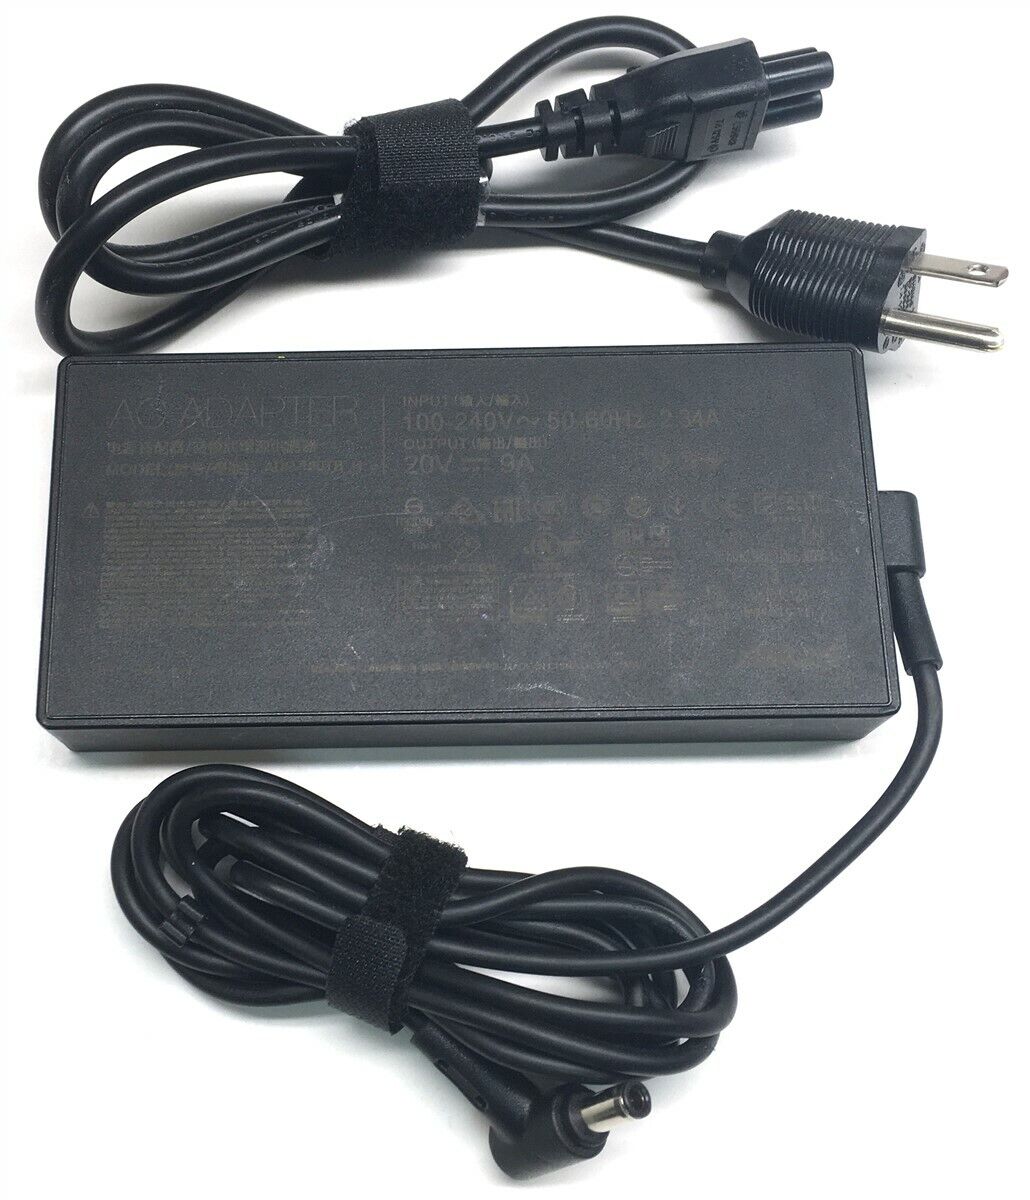 Genuine Asus Laptop Charger AC Adapter Power Supply ADP-180TB H 20V 9A 180W 